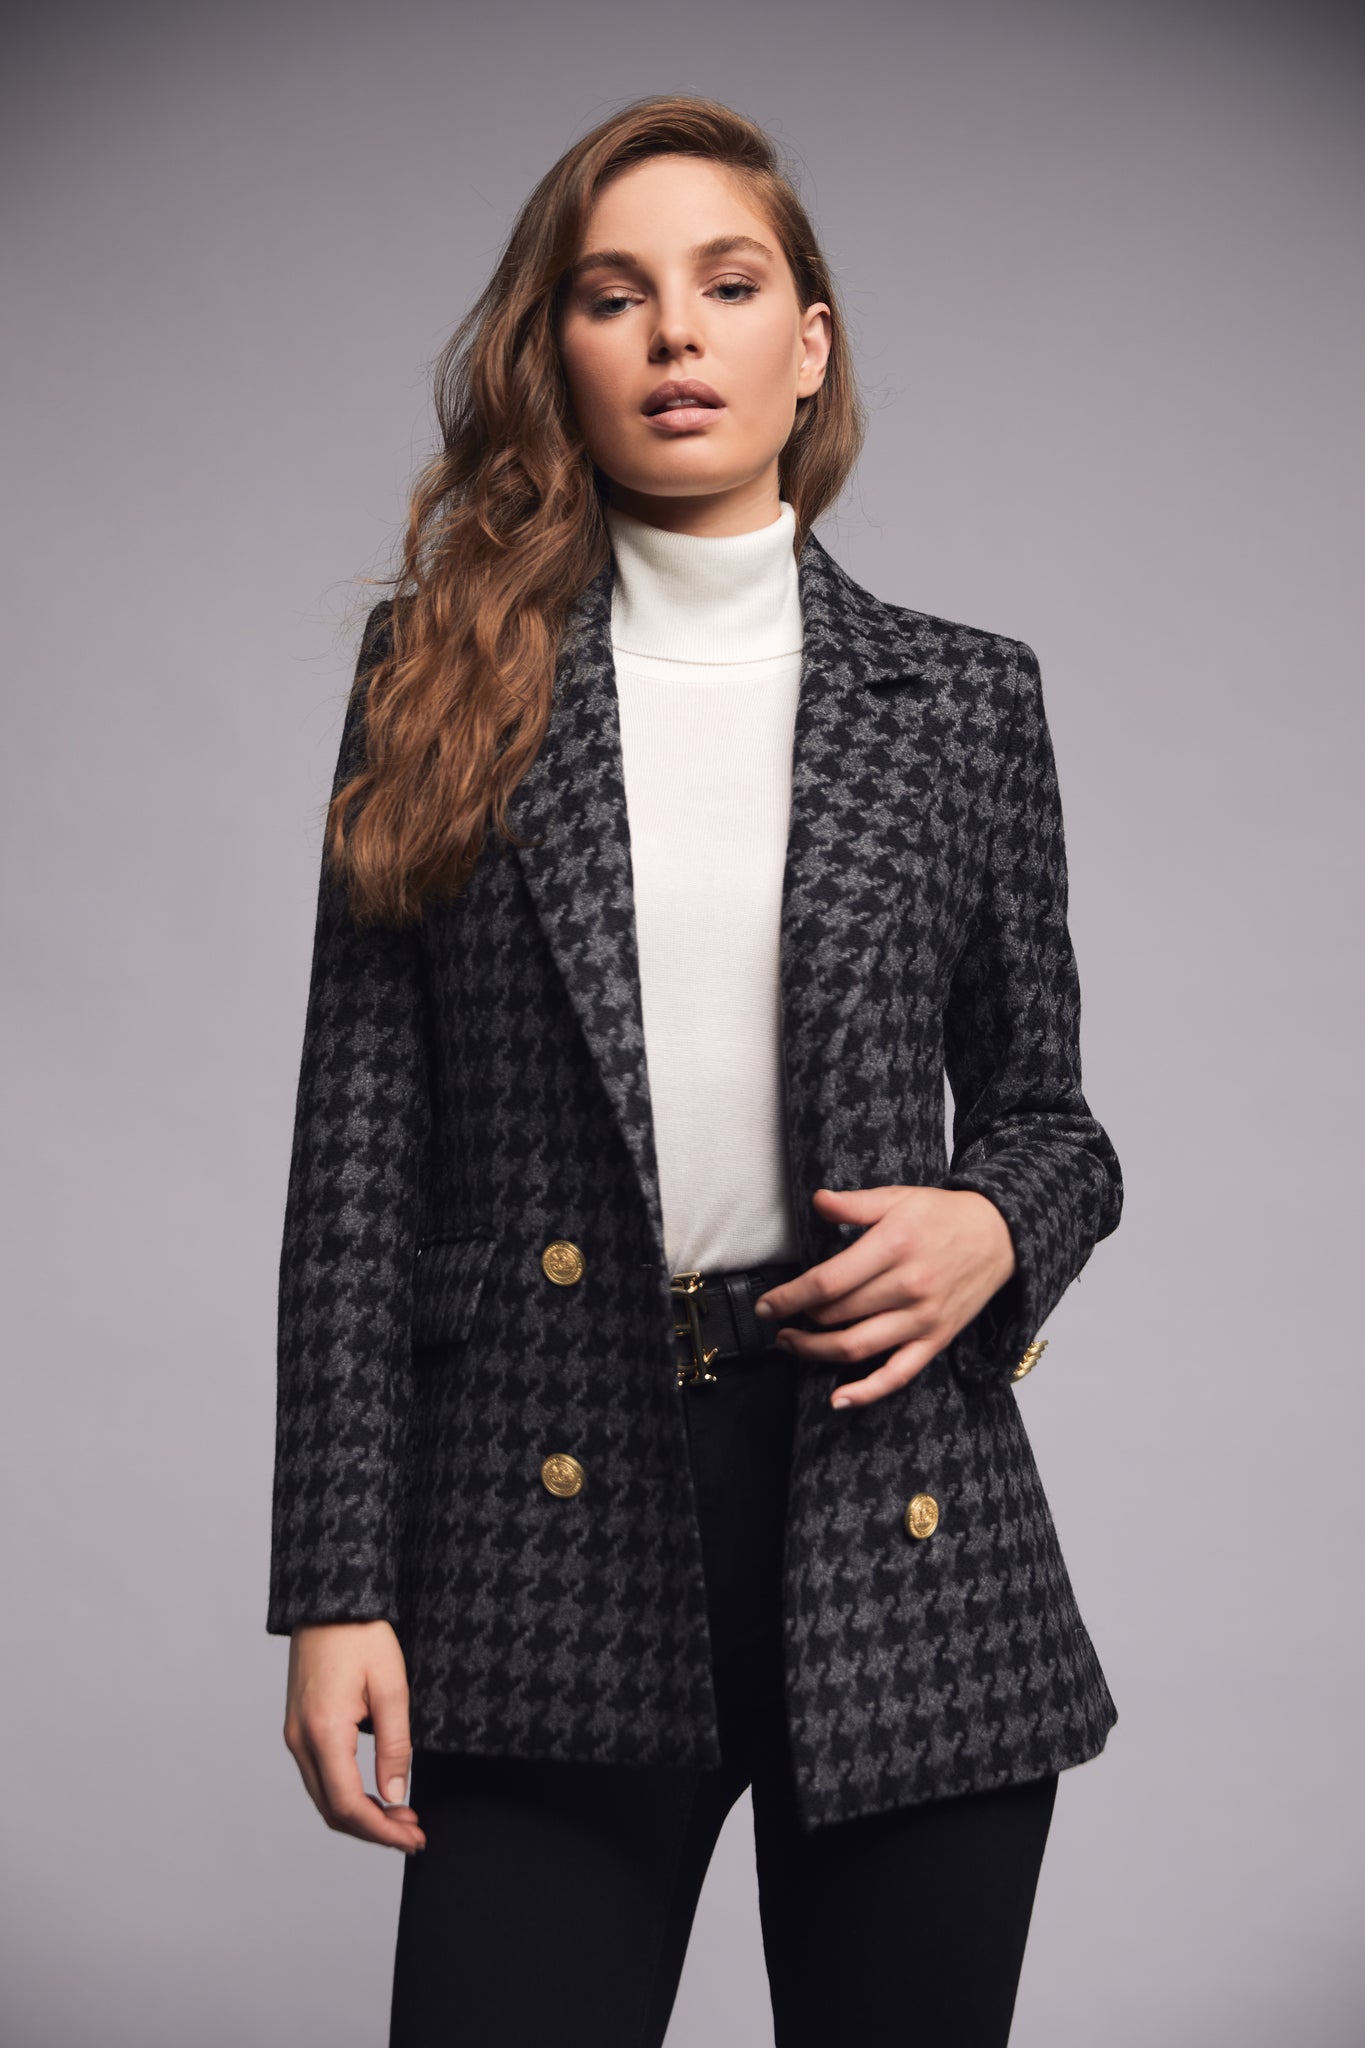 double breasted wool blazer in grey and black large scale houndstooth with two hip pockets and gold button details down front and on cuffs and handmade in the uk